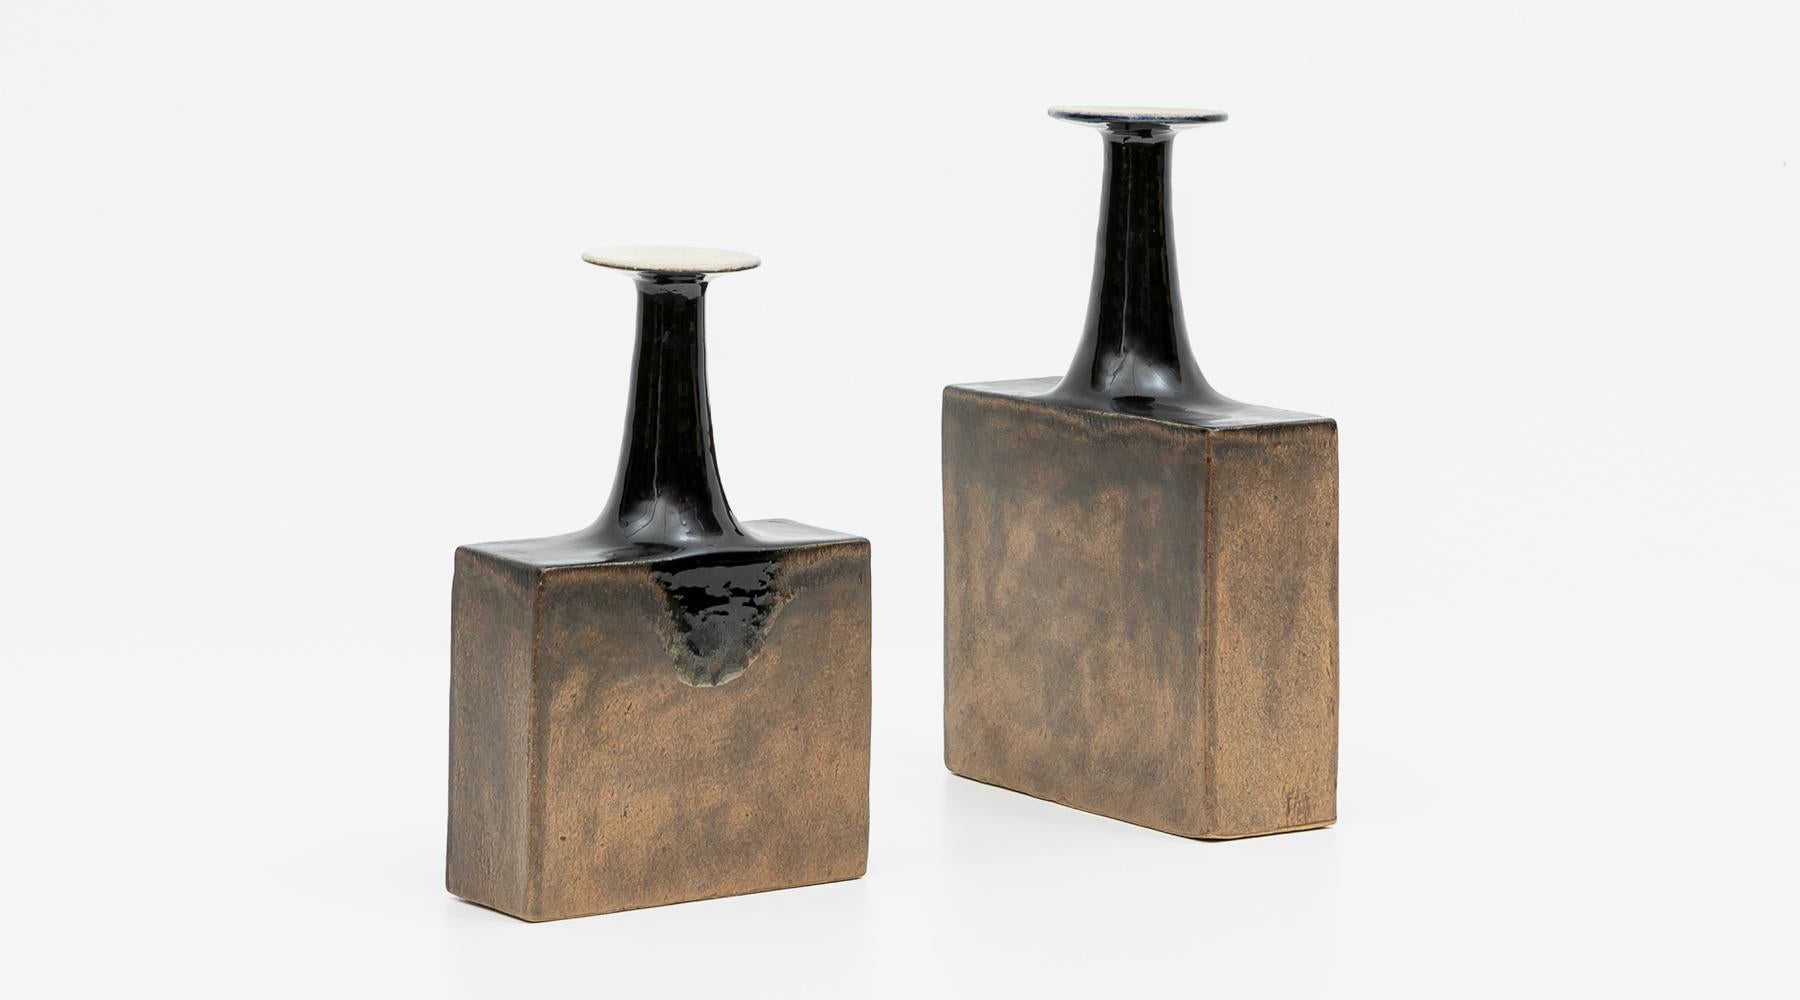 Set of two vases, ceramic, glazed, Bruno Gambone, Italy, 1970s.

Gorgeous vases by the multi-talented artist Bruno Gambone from the 1980s. They vary in height and width. This set comes in warm earth tones and black. The neck is in each case